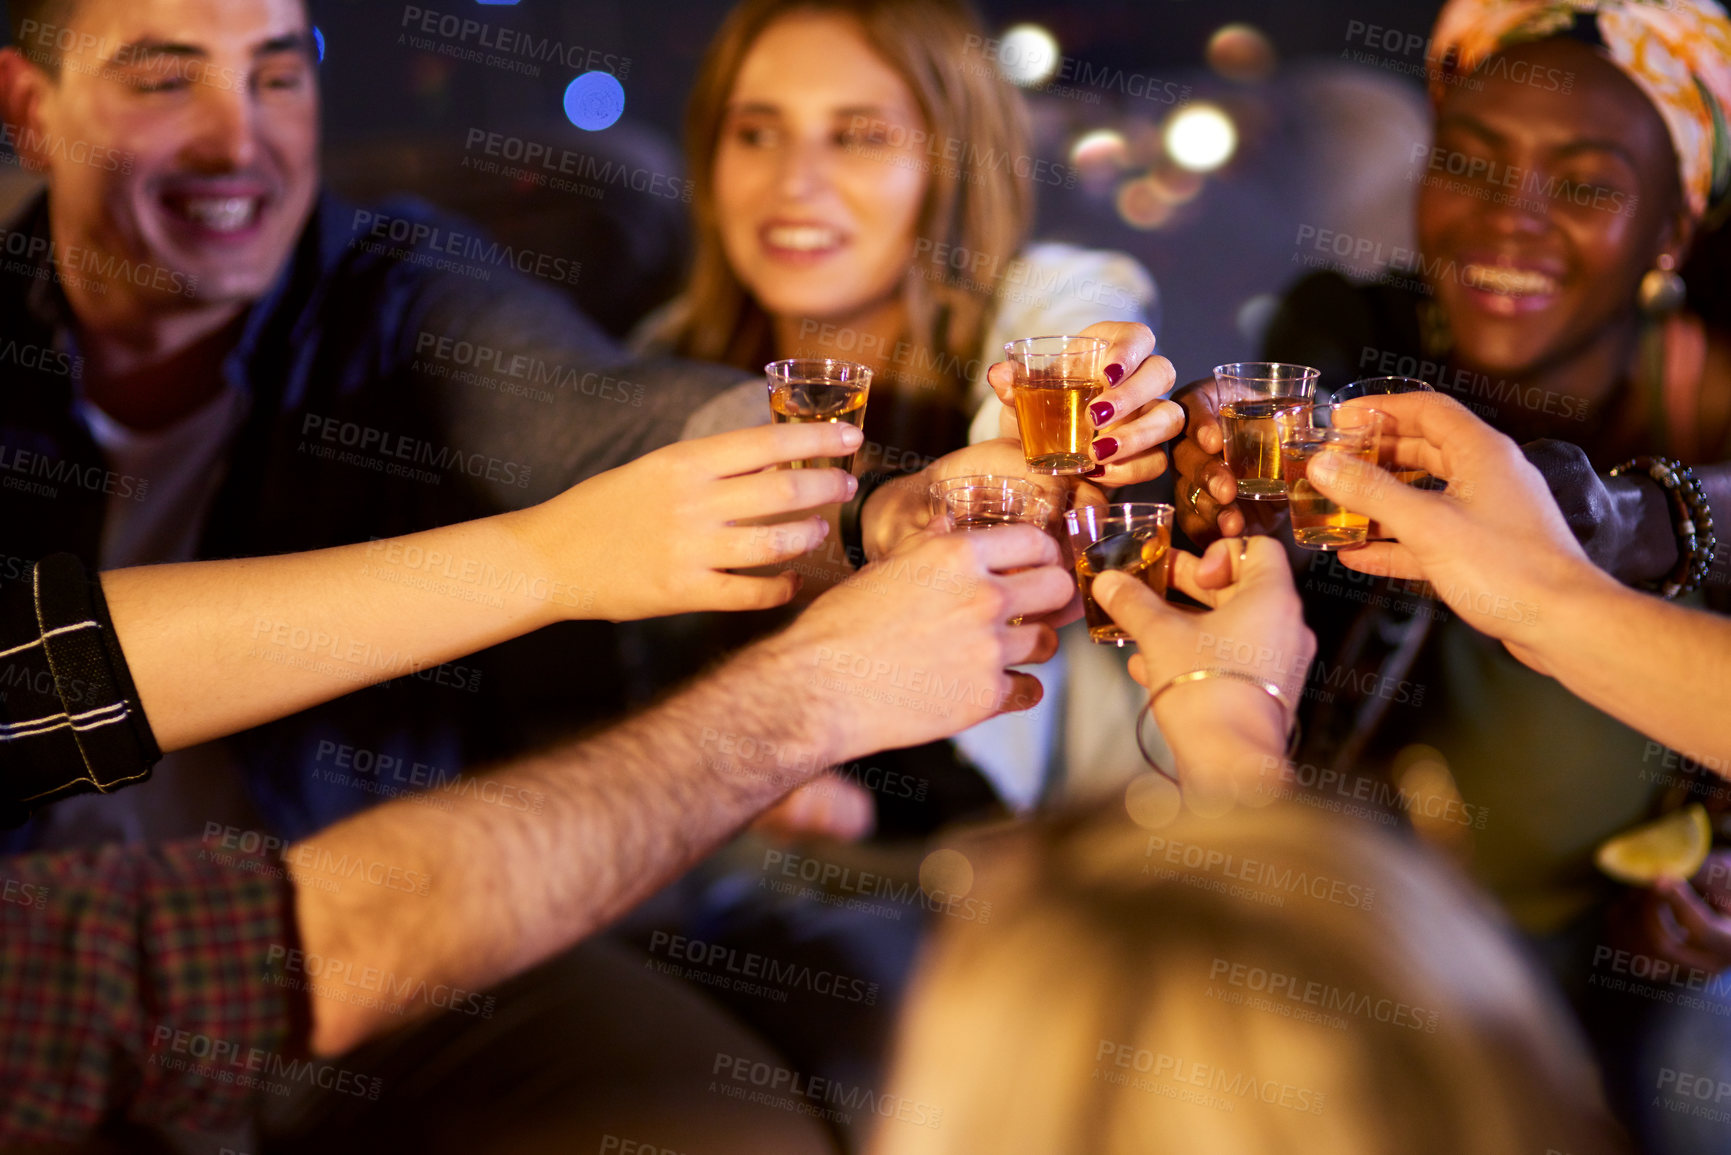 Buy stock photo Cropped shot of a group of friends having fun at a nightclub